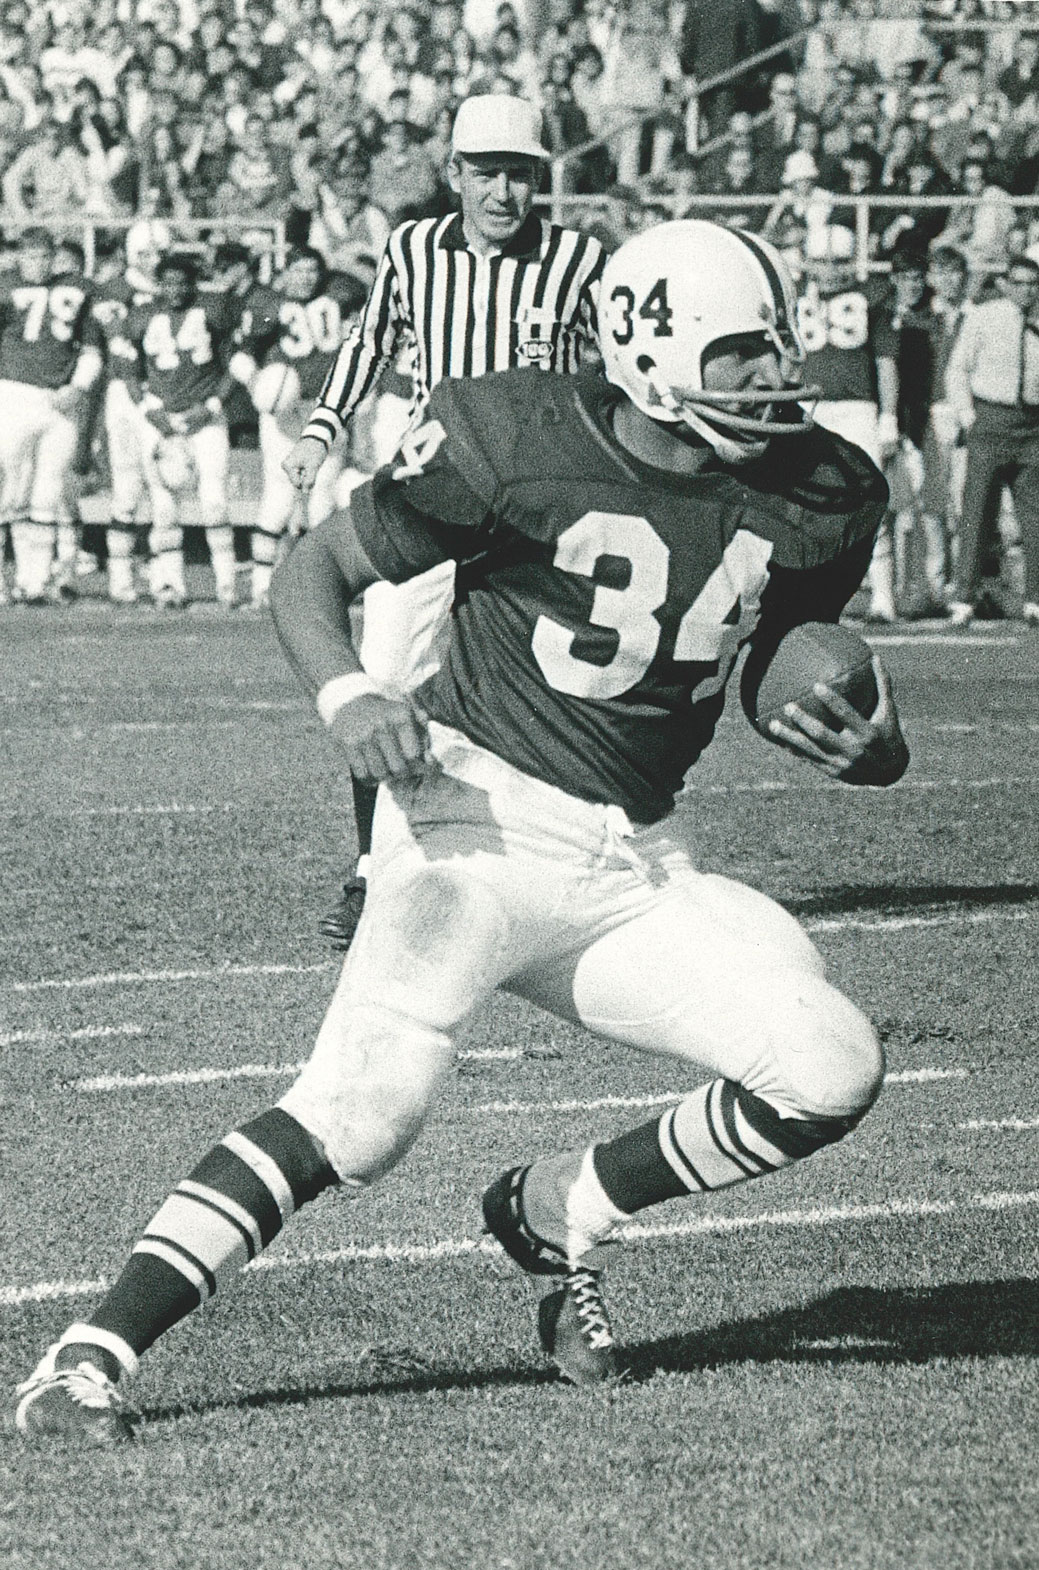 Penn State Archives black and white photo of Franco Harris wearing number 34 for the Nittany Lions